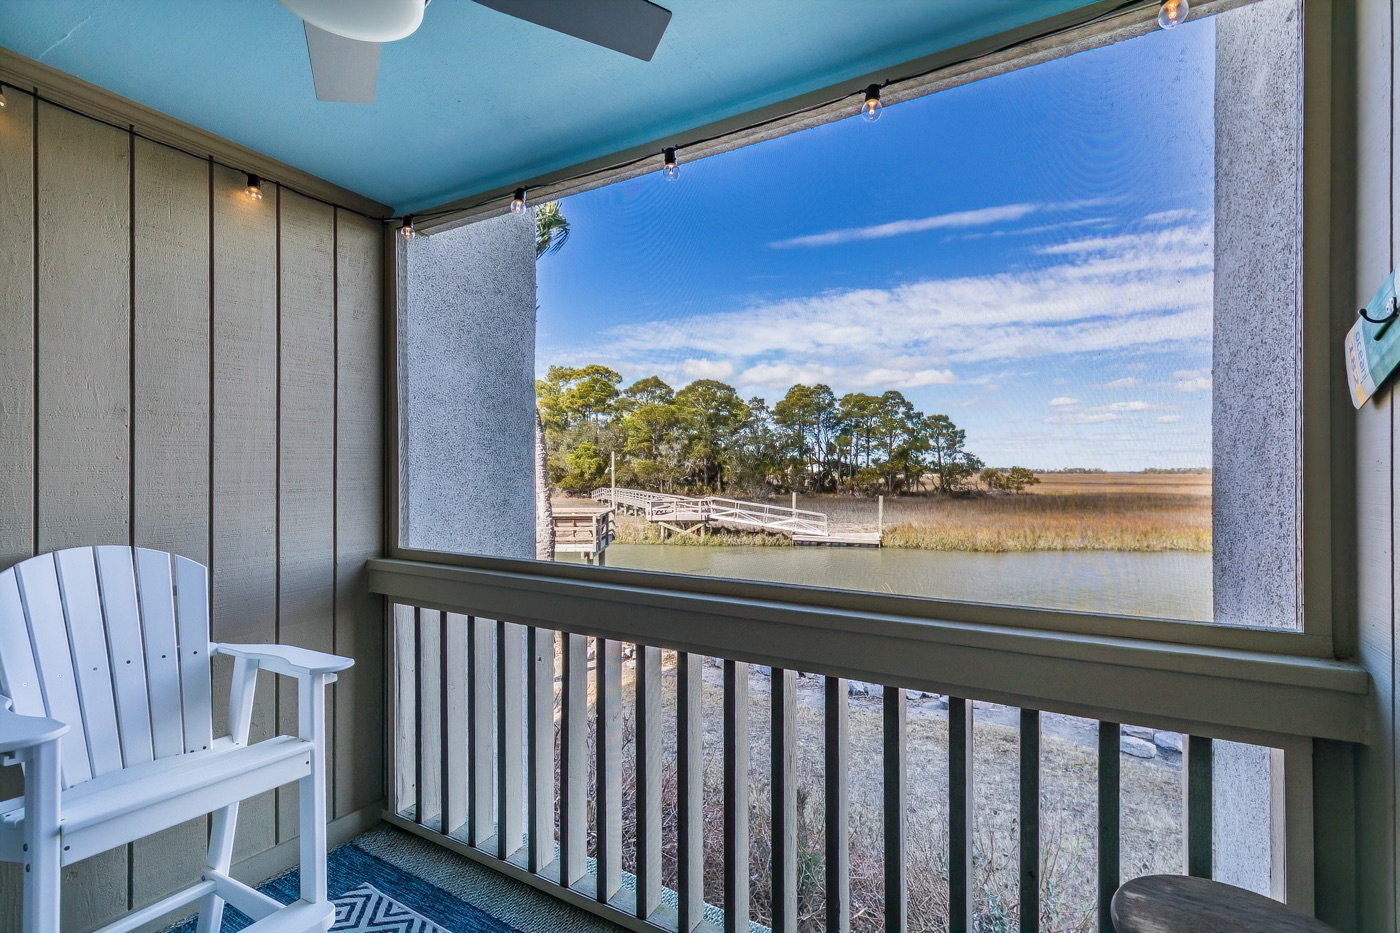 Watch the marsh, tide, boats, and wildlife without leaving the screened in patio.